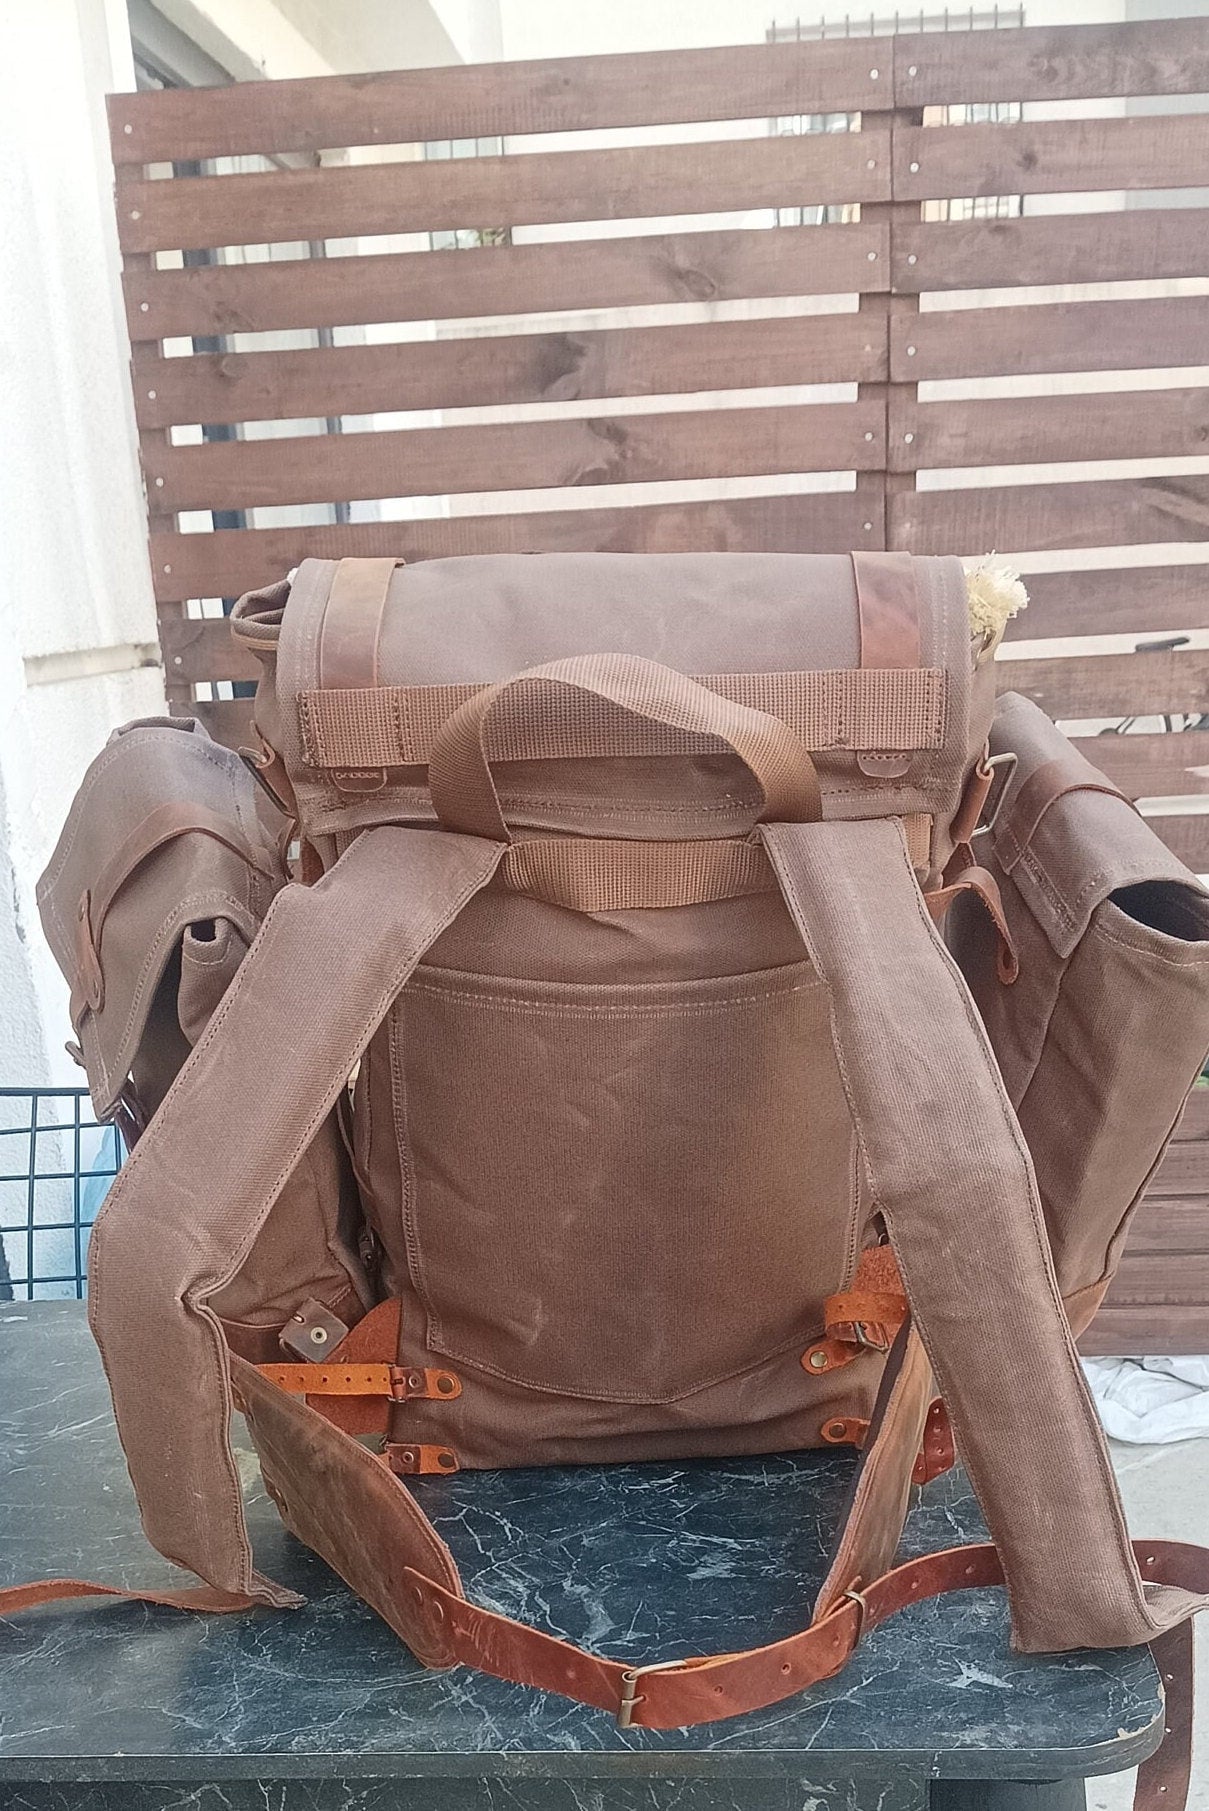 30L to 50L | Handmade  Waxed Canvas Backpack with leather for Travel, Camping | 50 Liter | Personalization  99percenthandmade   